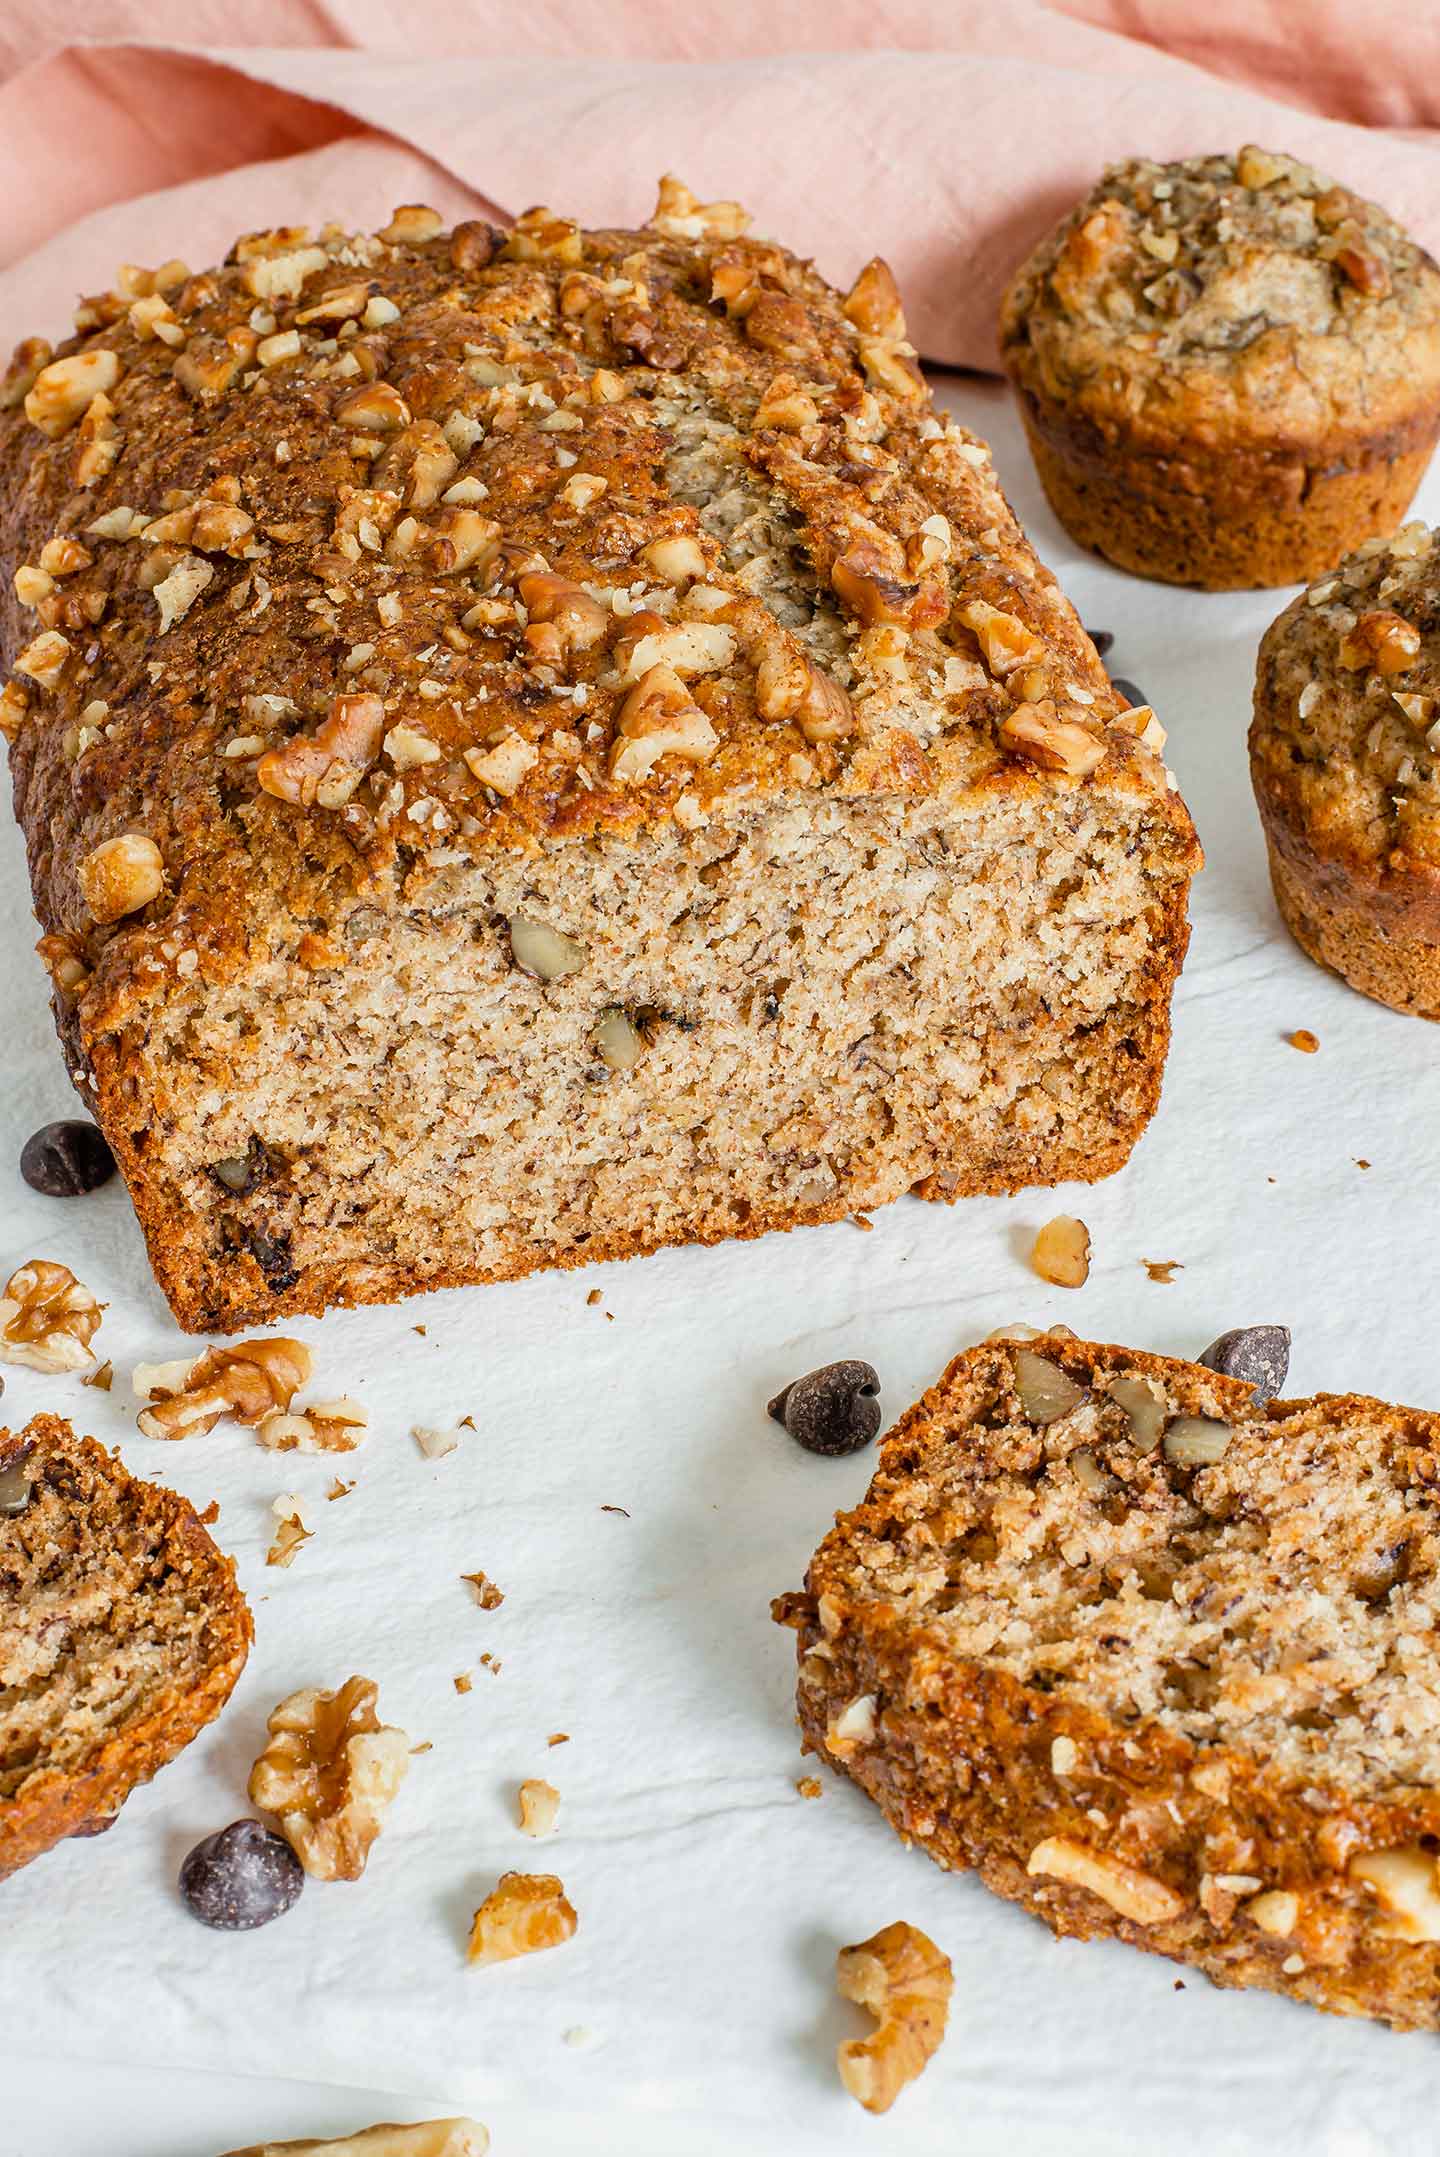 Side view of a sliced loaf of vegan banana bread with walnuts. Banana muffins are visible in the background.